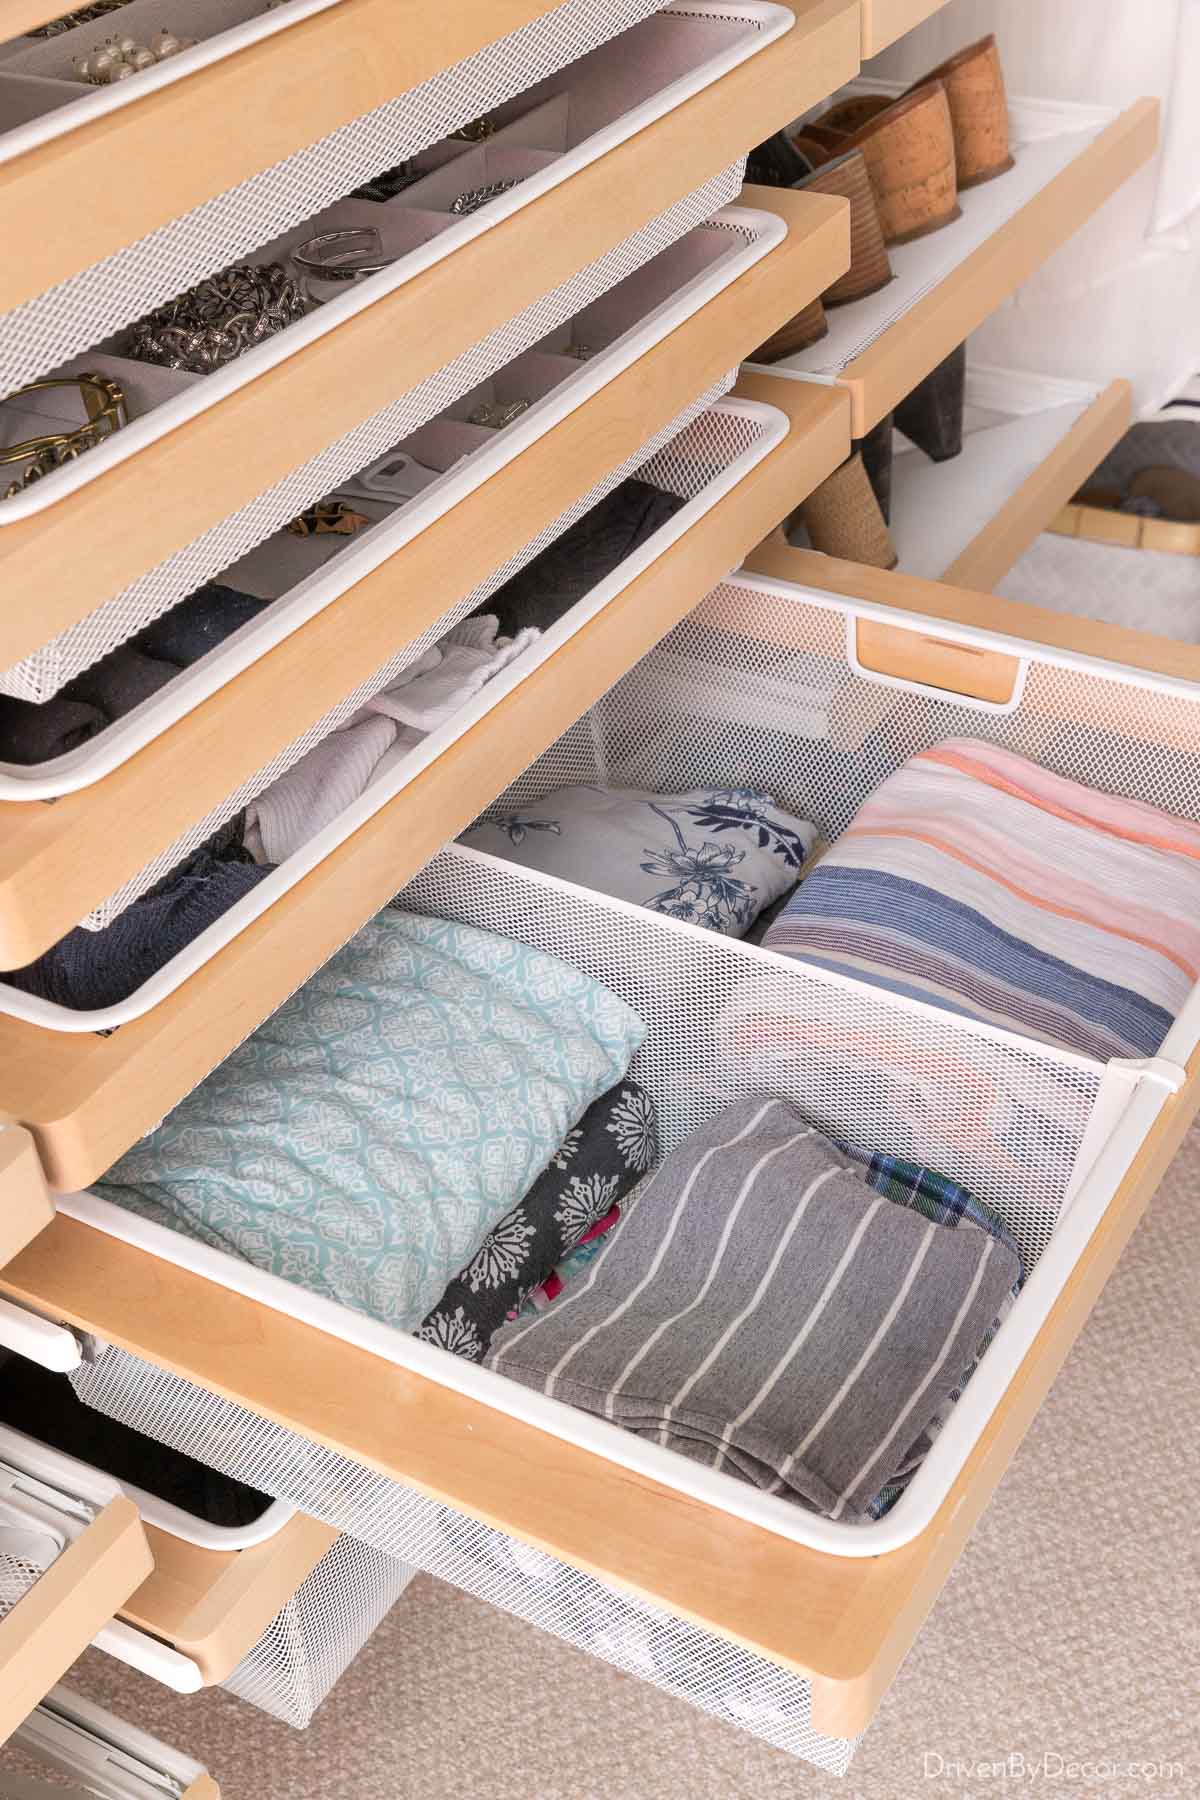 The Container Store Elfa Classic Narrow Tall Drawer Solution